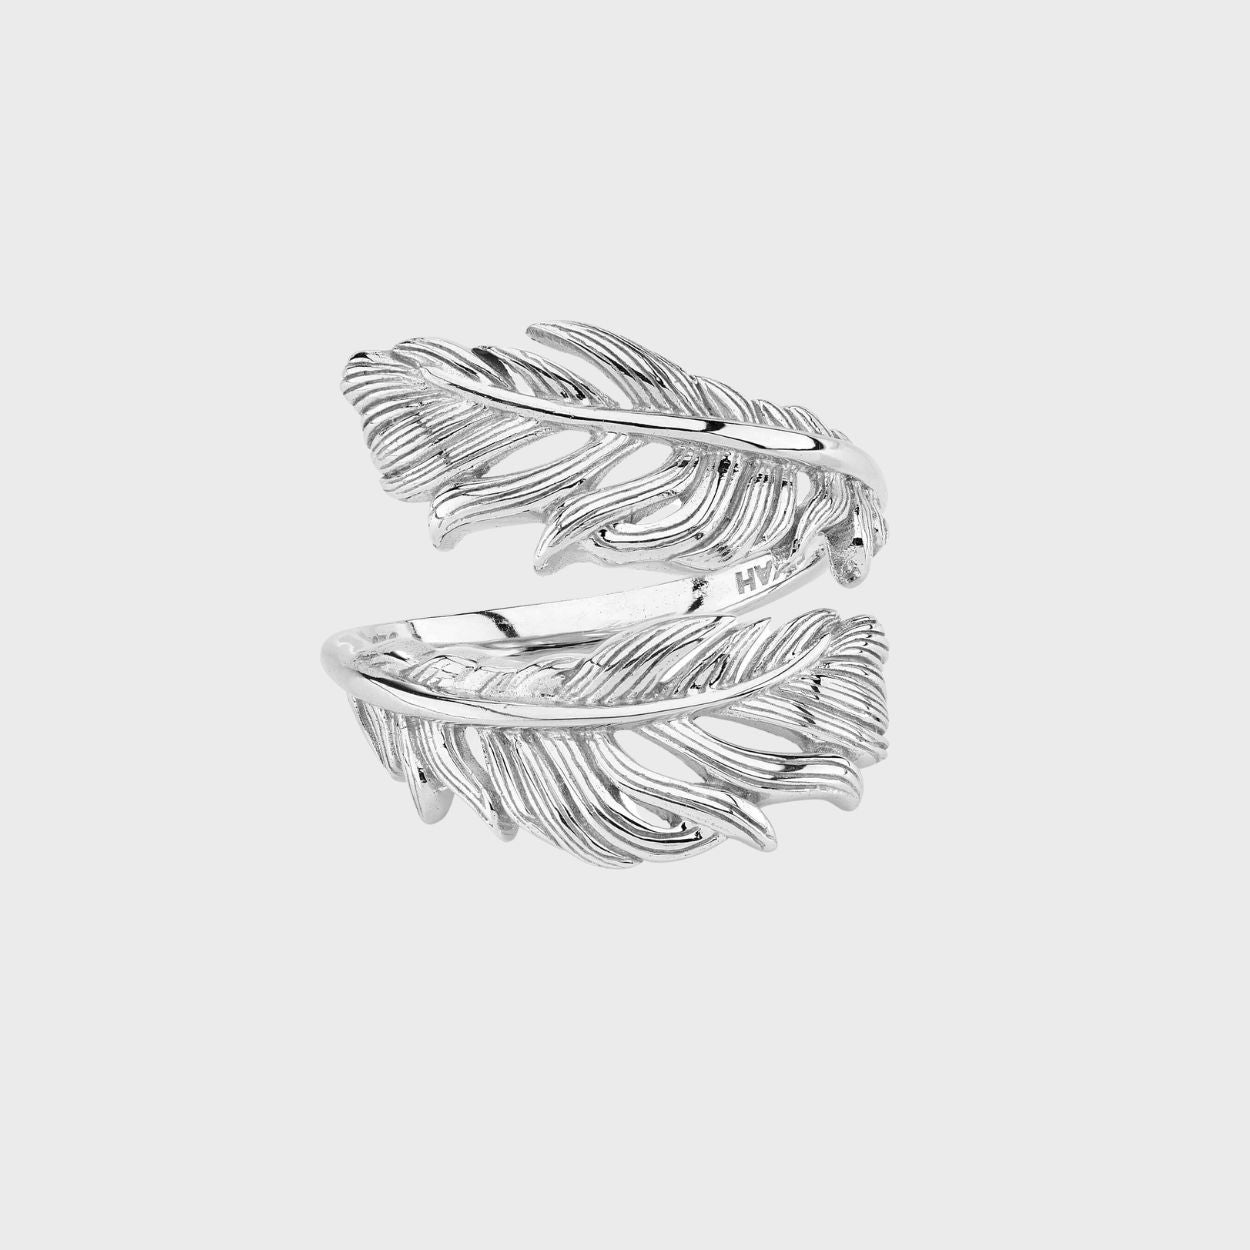 Adjustable Silver Floating Feather Ring